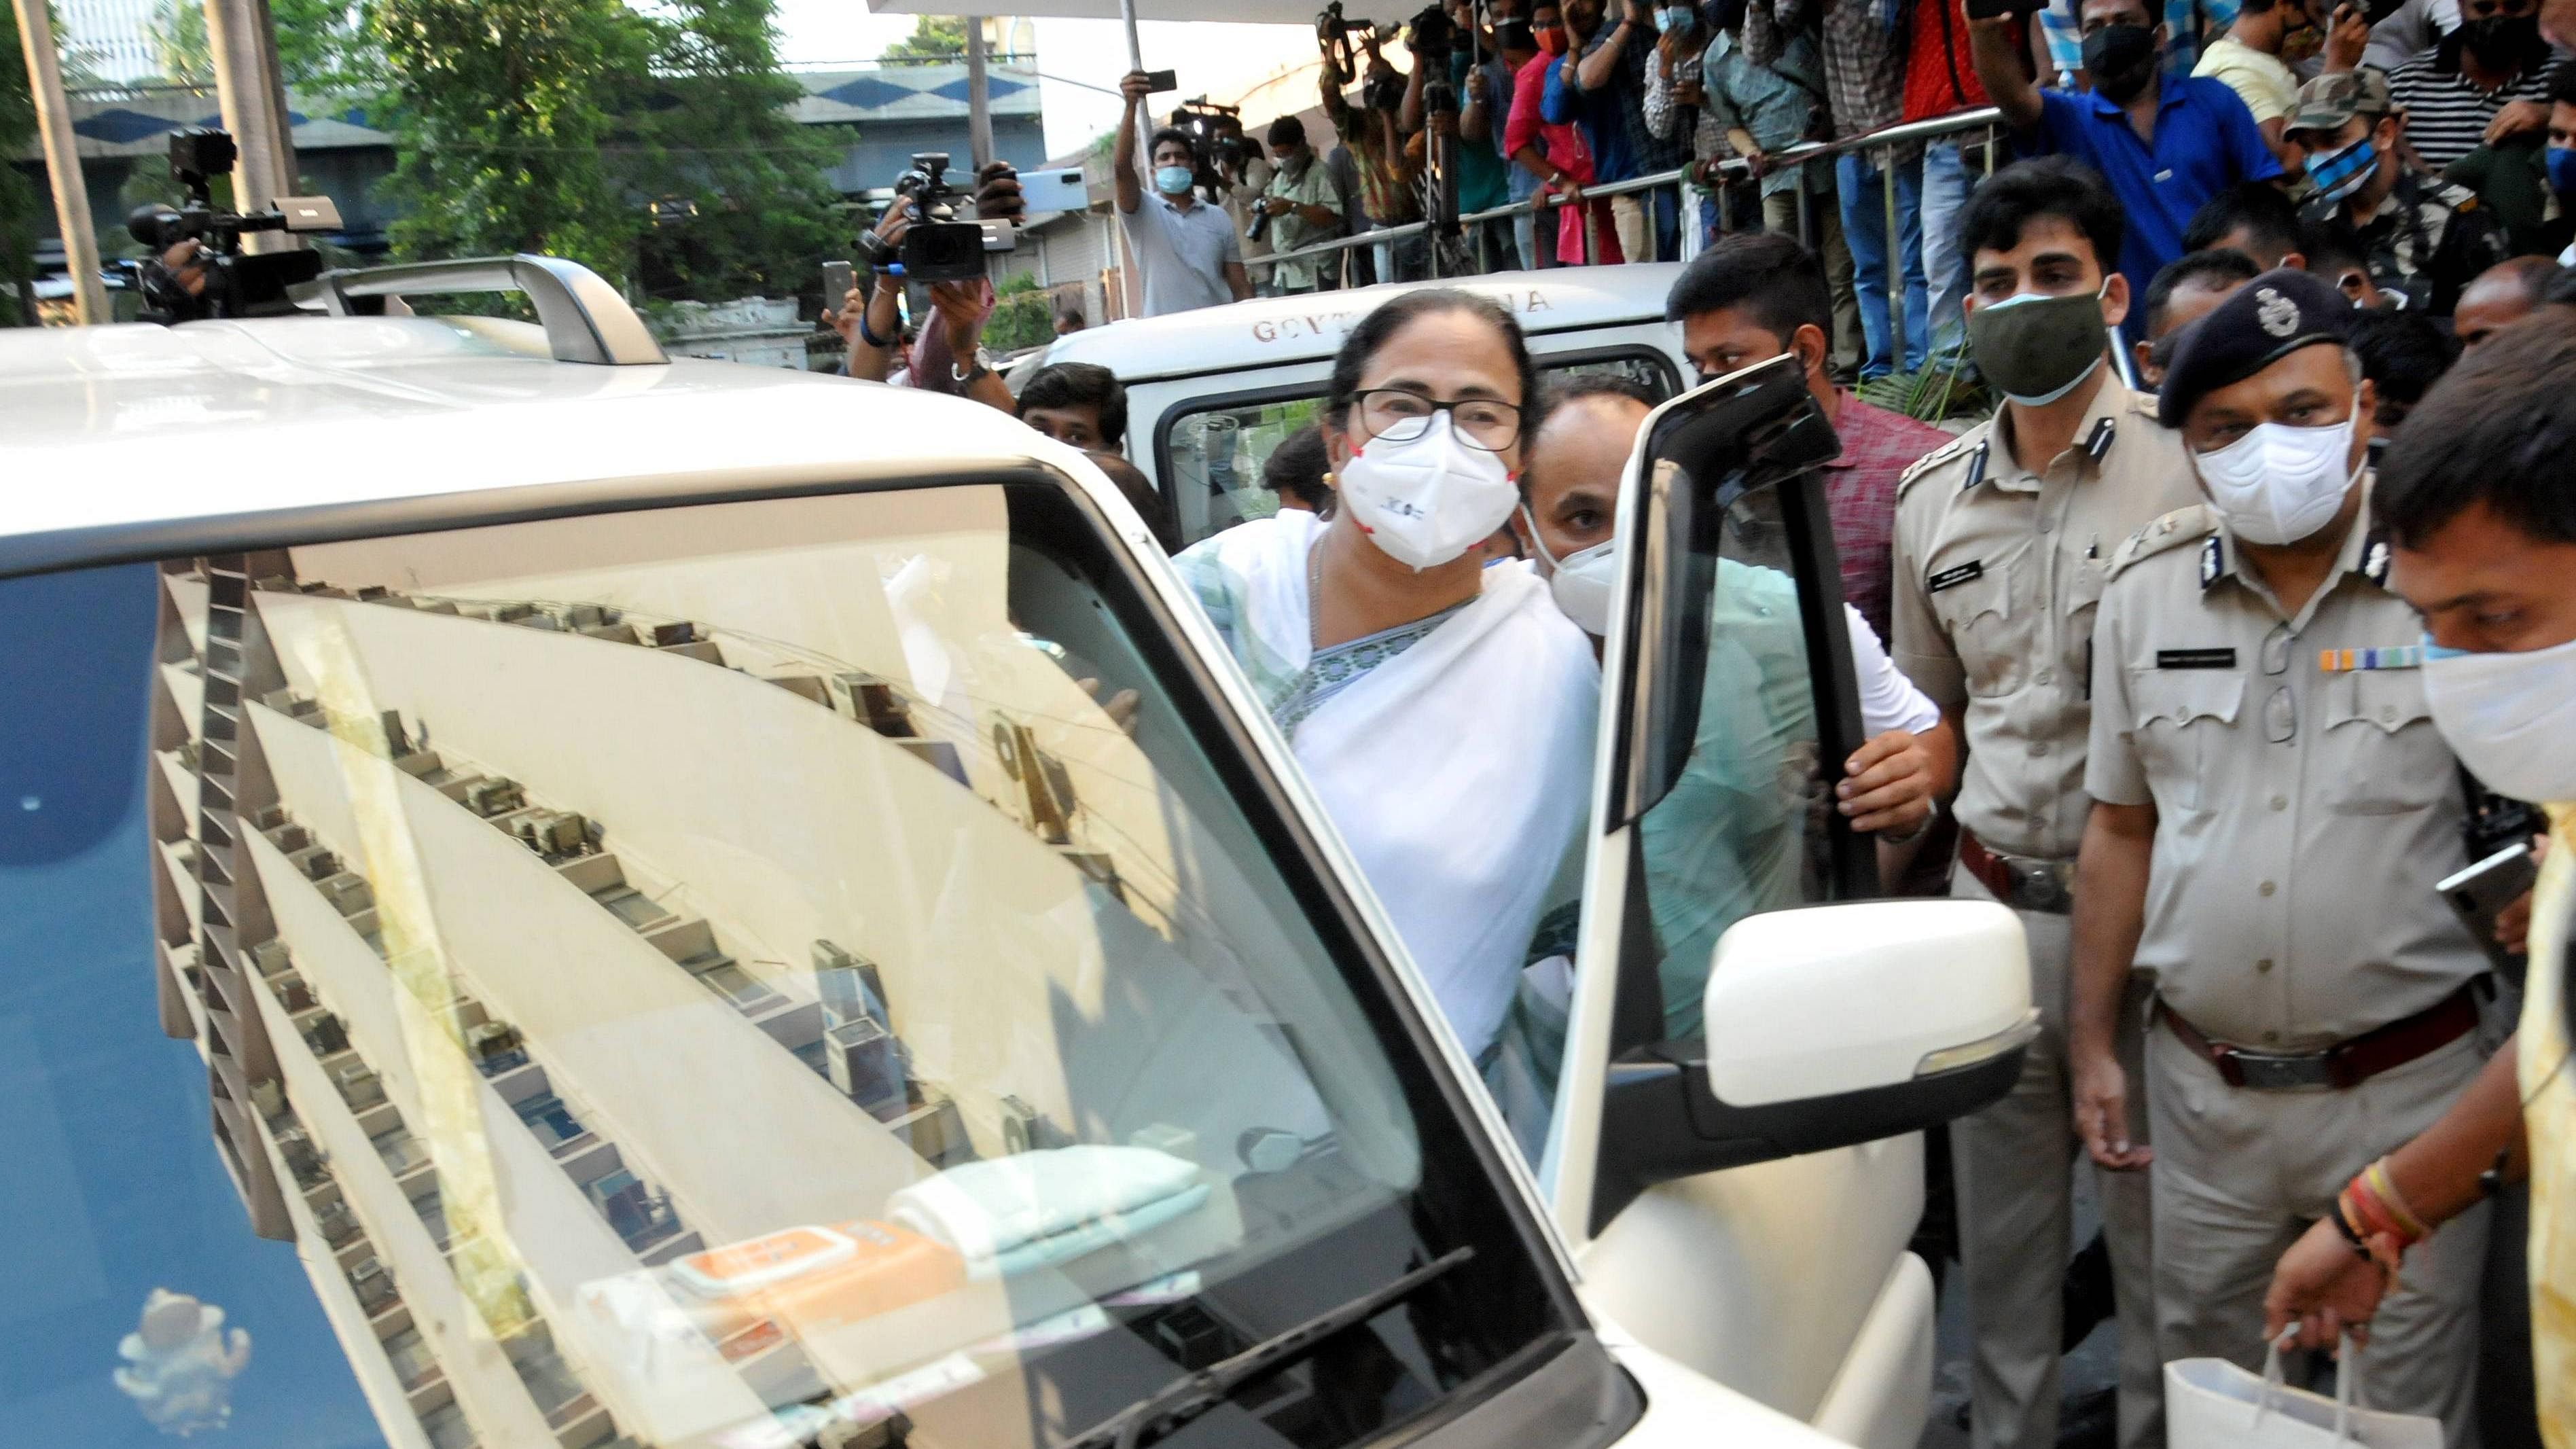 West Bengal CM Mamata Banerjee leaves the CBI office at Nizam Palace where she had come following the arrest of TMC ministers and MLAs in a scam case, in Kolkata, Monday. Credit: PTI